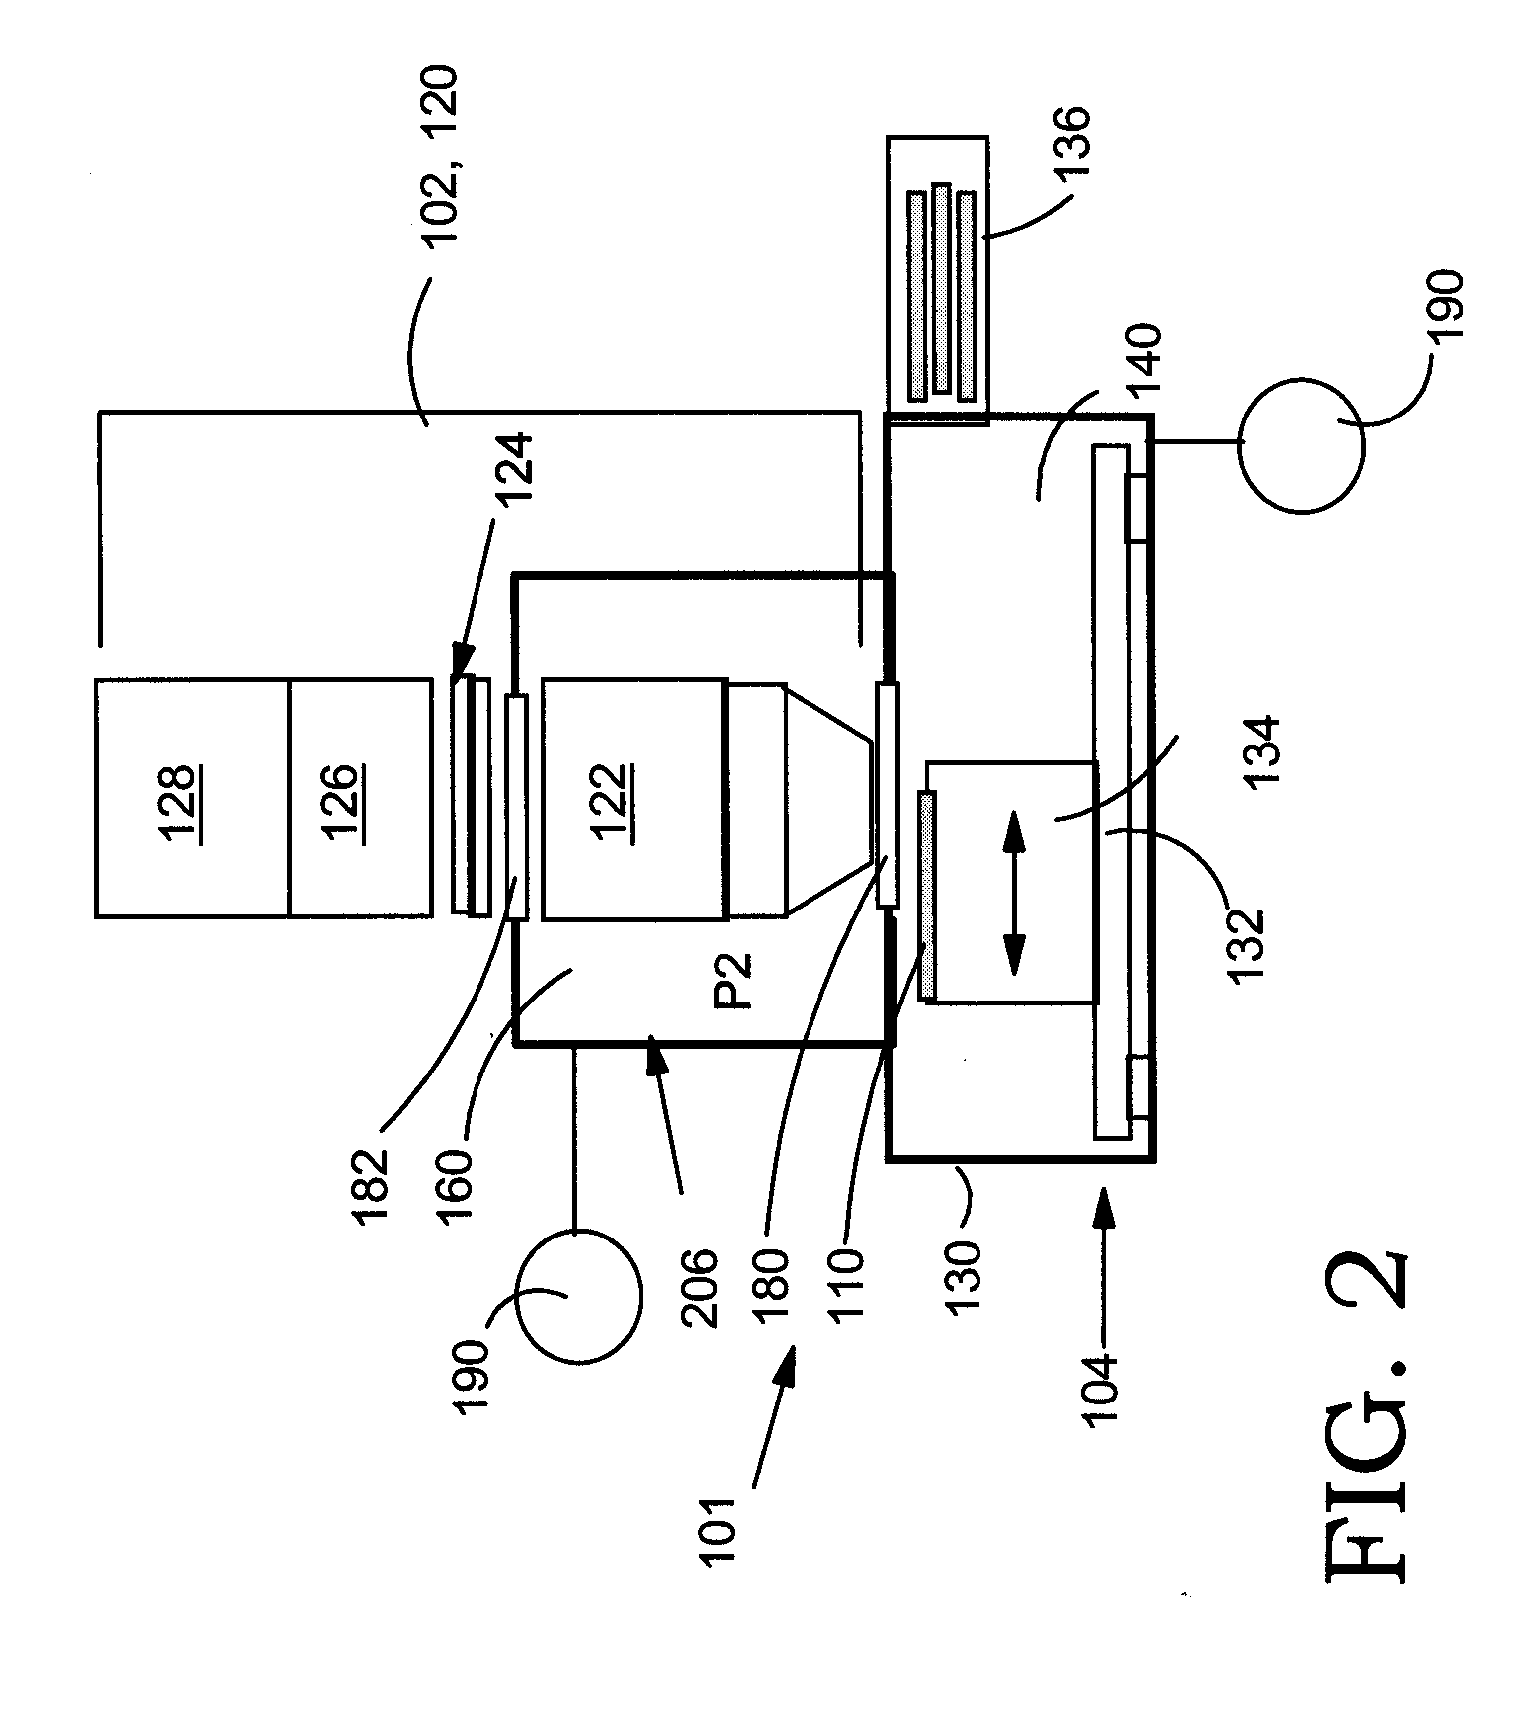 Immersion lithography with equalized pressure on at least projection optics component and wafer